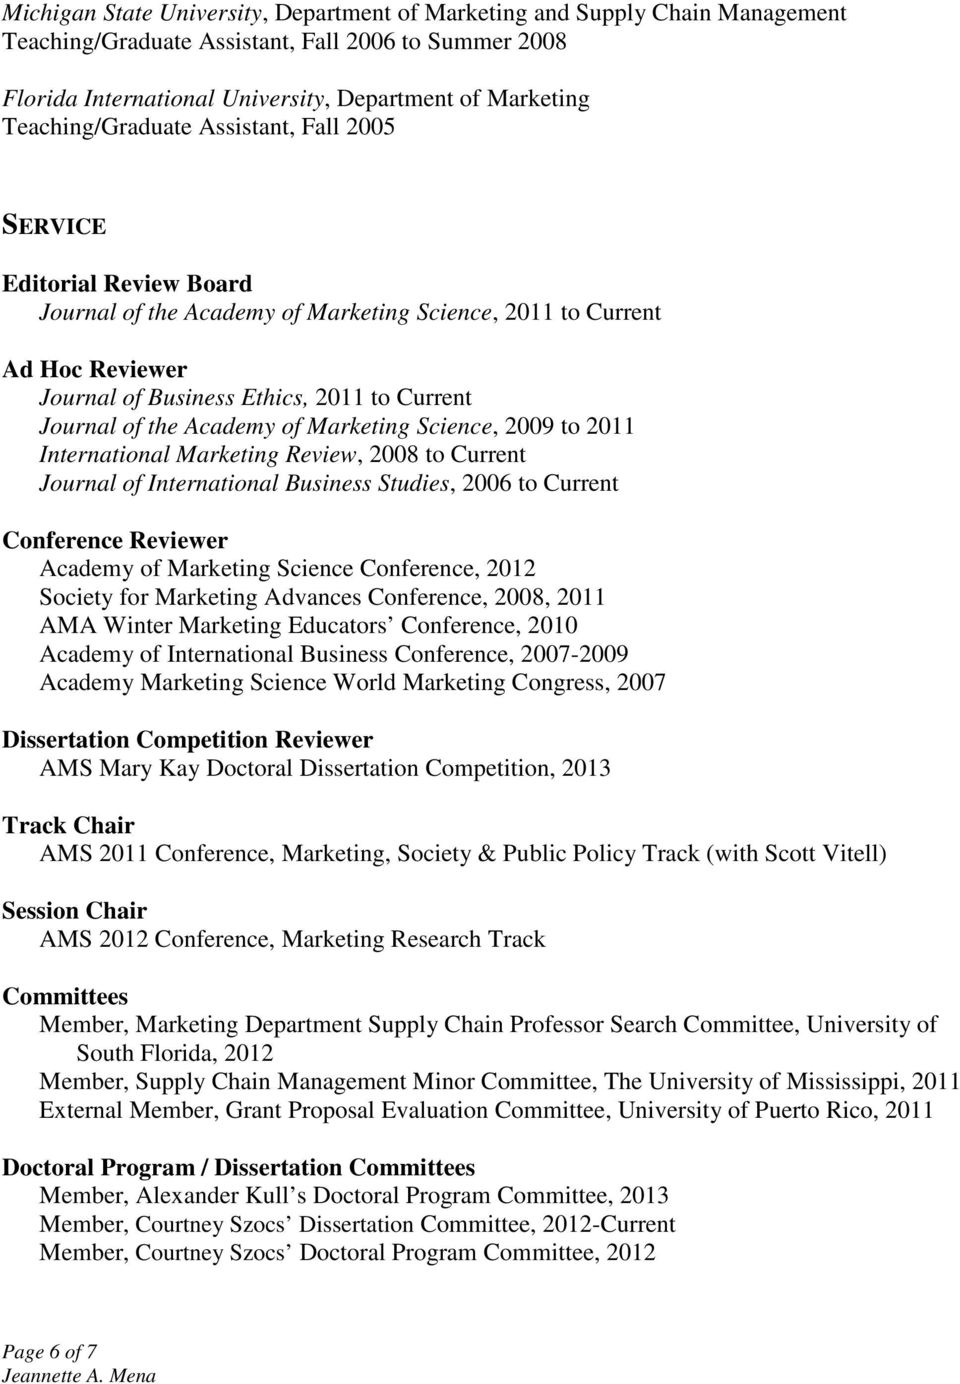 of the Academy of Marketing Science, 2009 to 2011 International Marketing Review, 2008 to Current Journal of International Business Studies, 2006 to Current Conference Reviewer Academy of Marketing